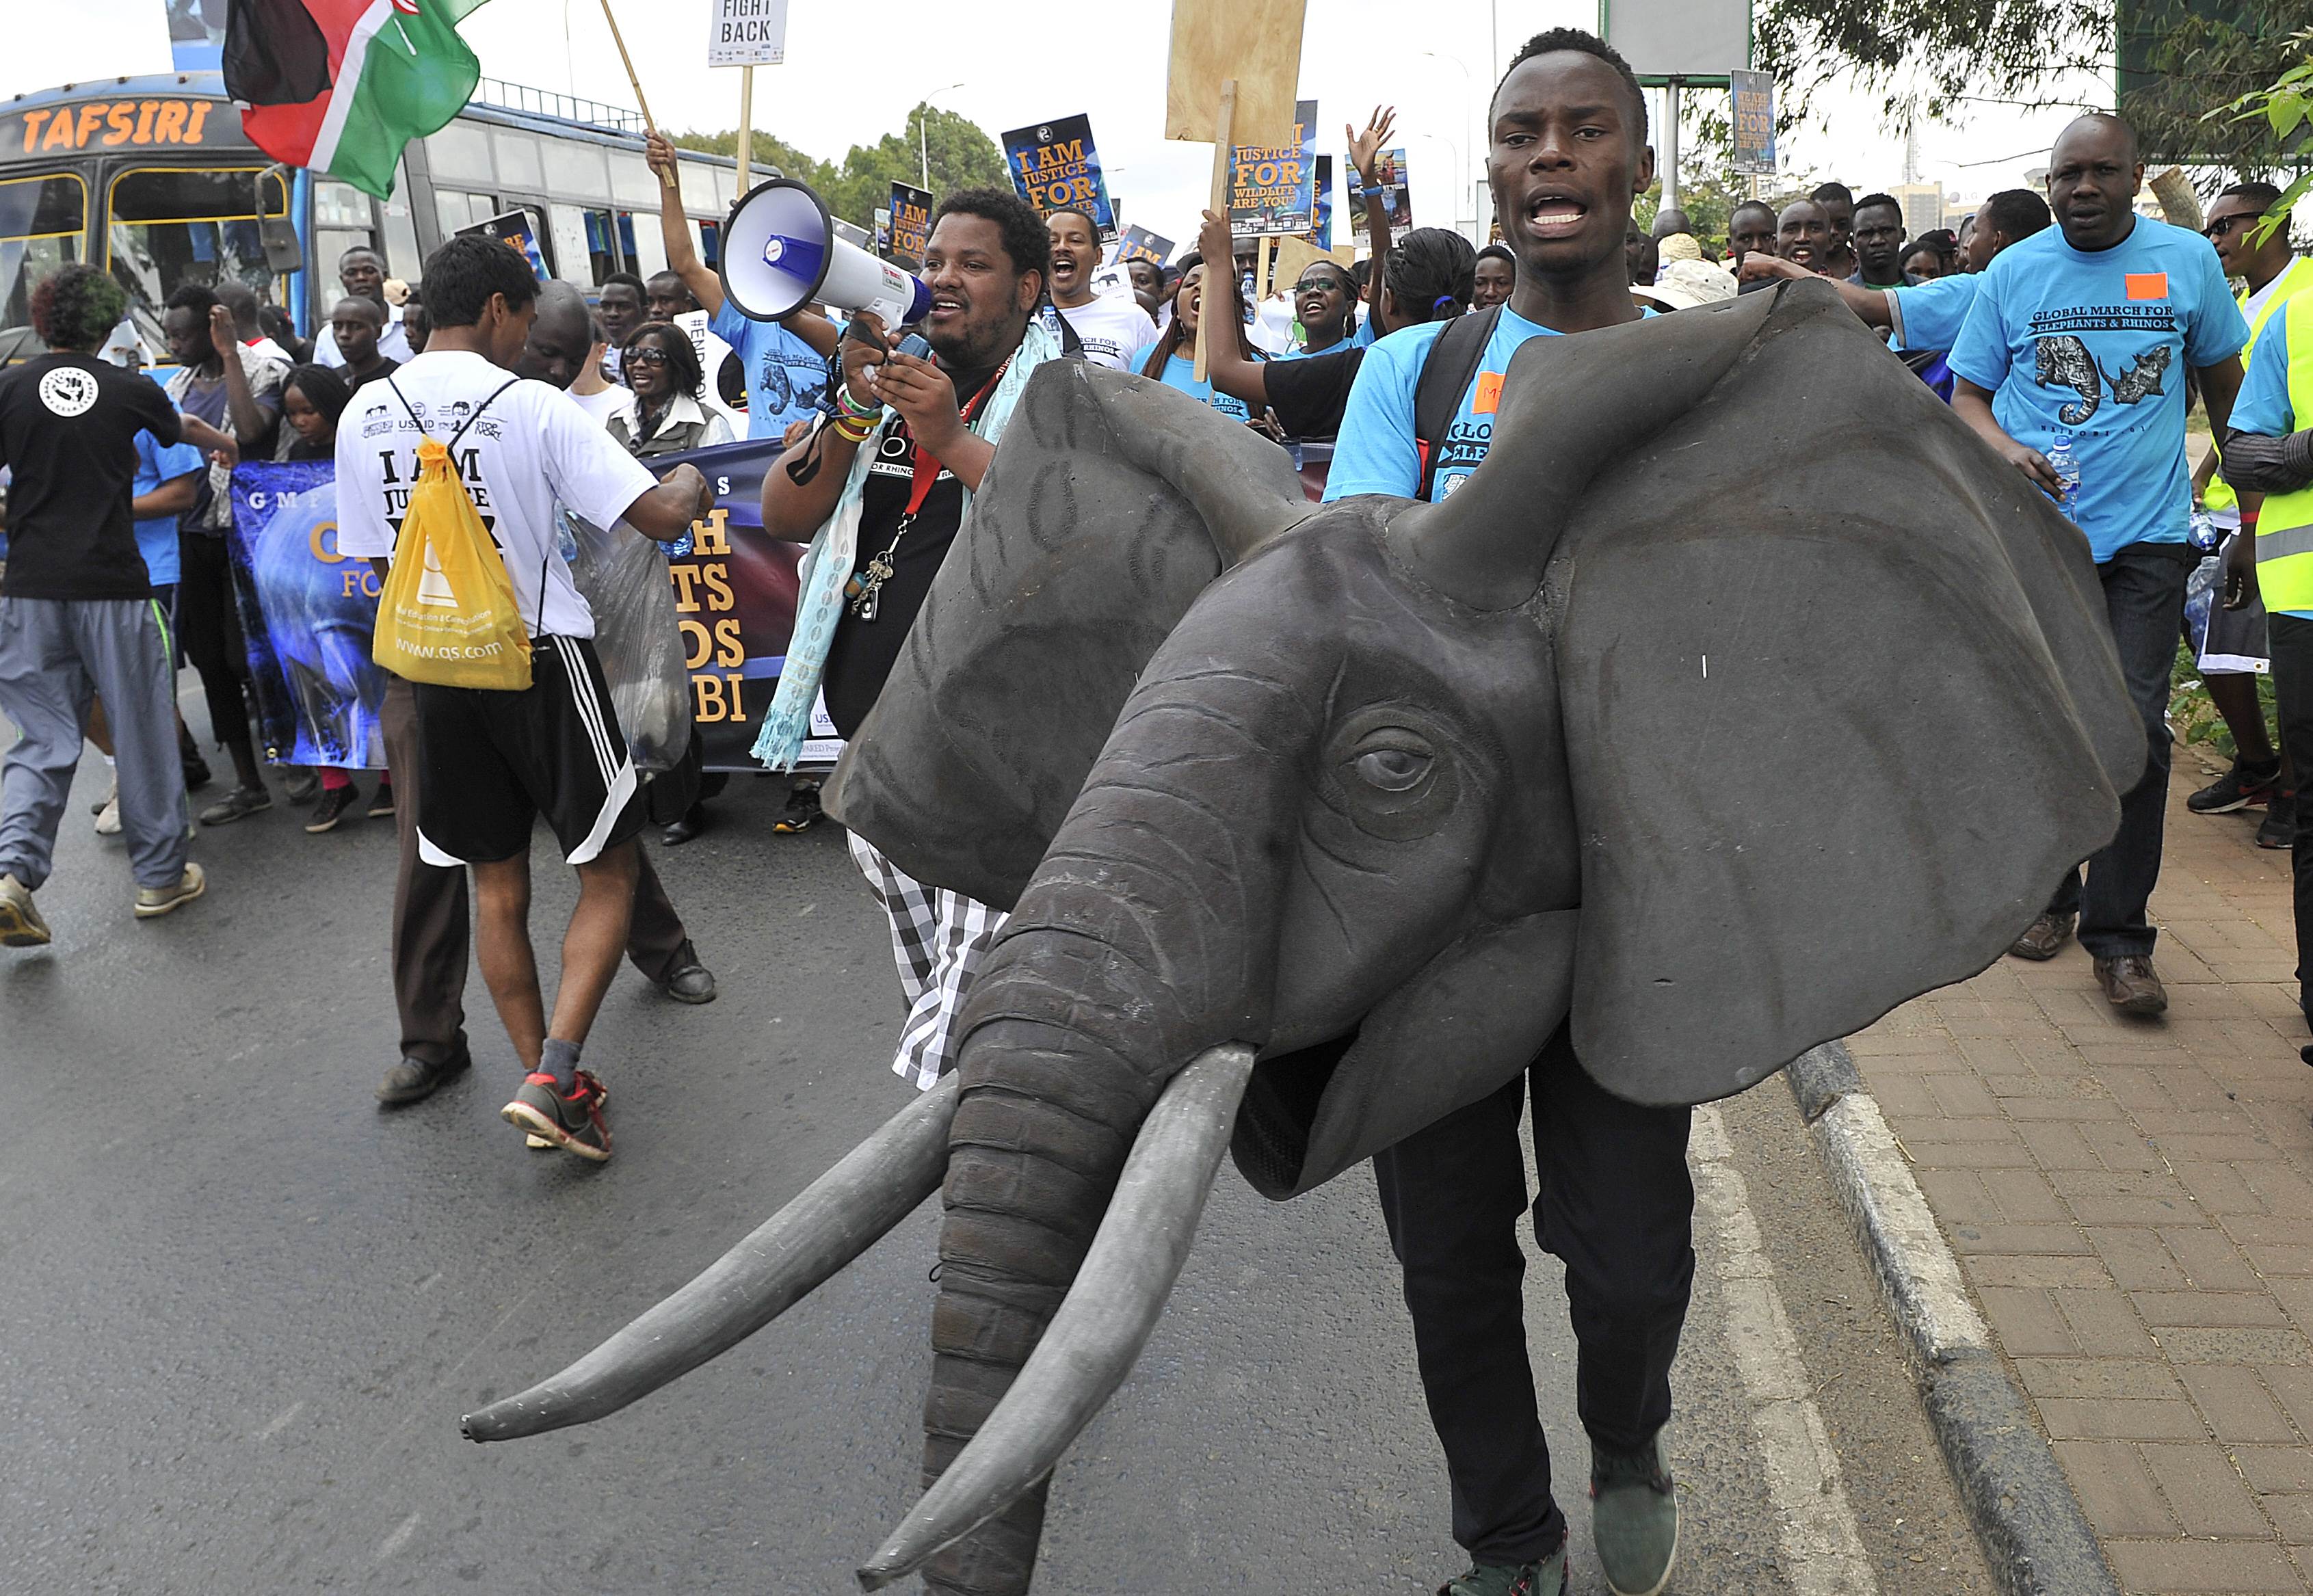 People rally as part of the Global March for Elephants and Rhinos demanding a halt to poaching of elephants and rhinos on October 3, 2015 in Nairobi. Photos: AP, EPA